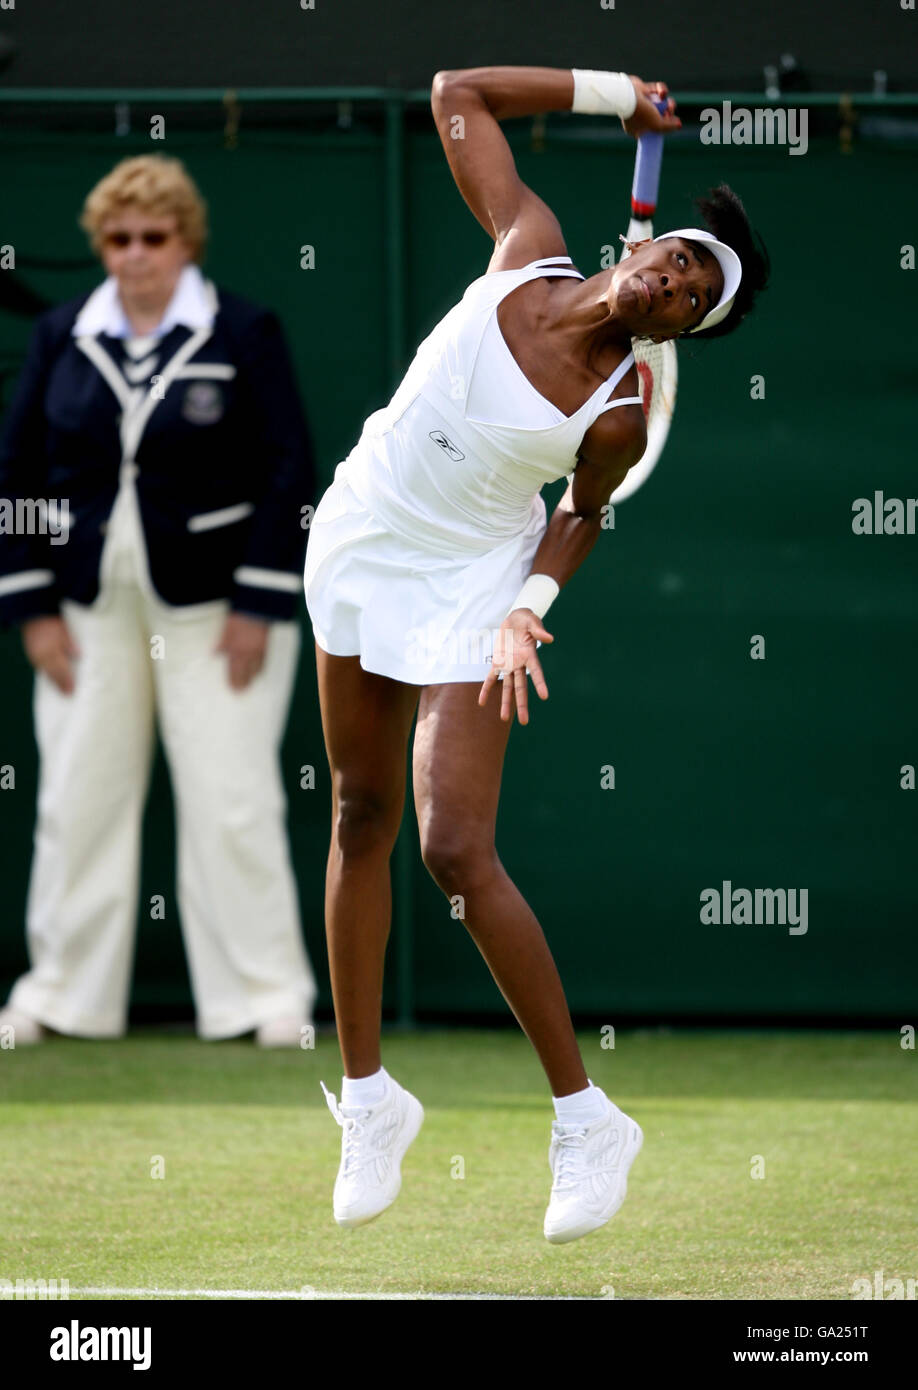 Tennis - Wimbledon Championships 2007 - Day Two - All England Club. Venus Williams in action against Alla Kudryavtseva Stock Photo